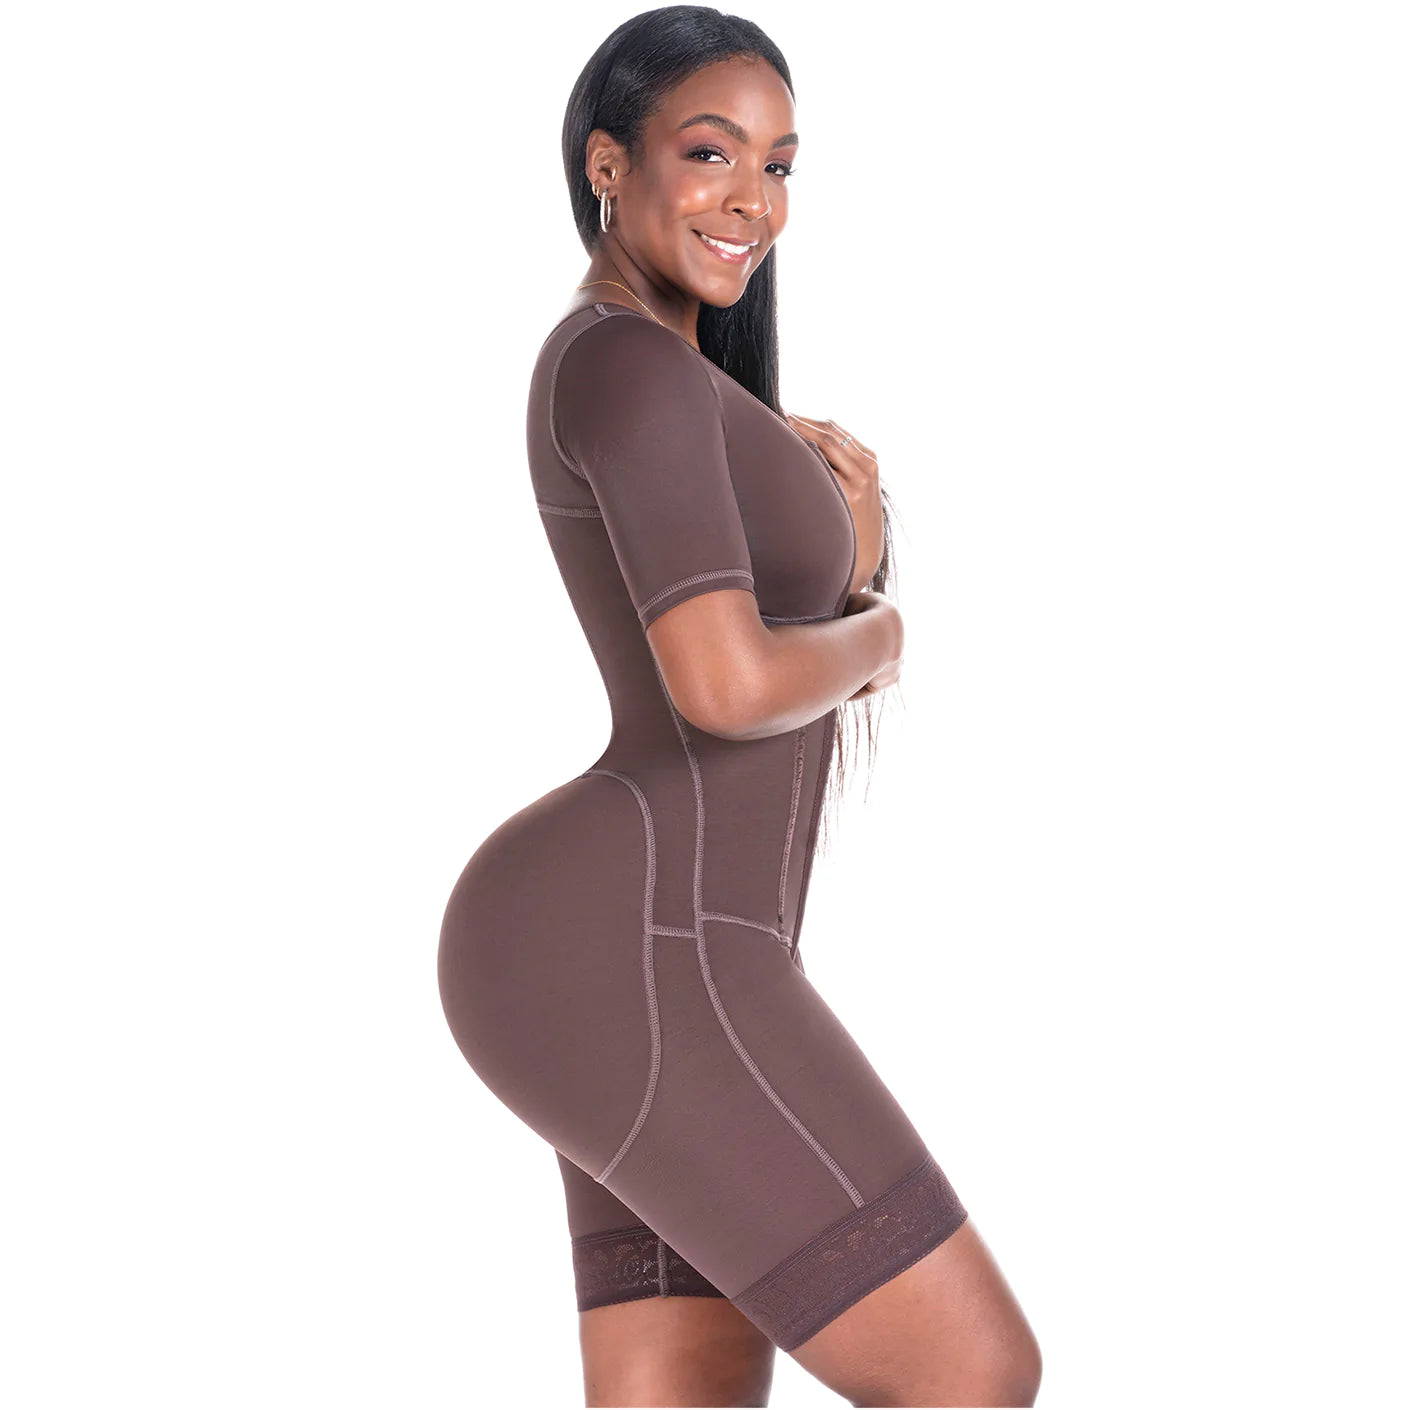 Curvy Divas 0938BF | Colombian Compression Garment for Women | Post Surgery Use | With Sleeves and Built-in Bra